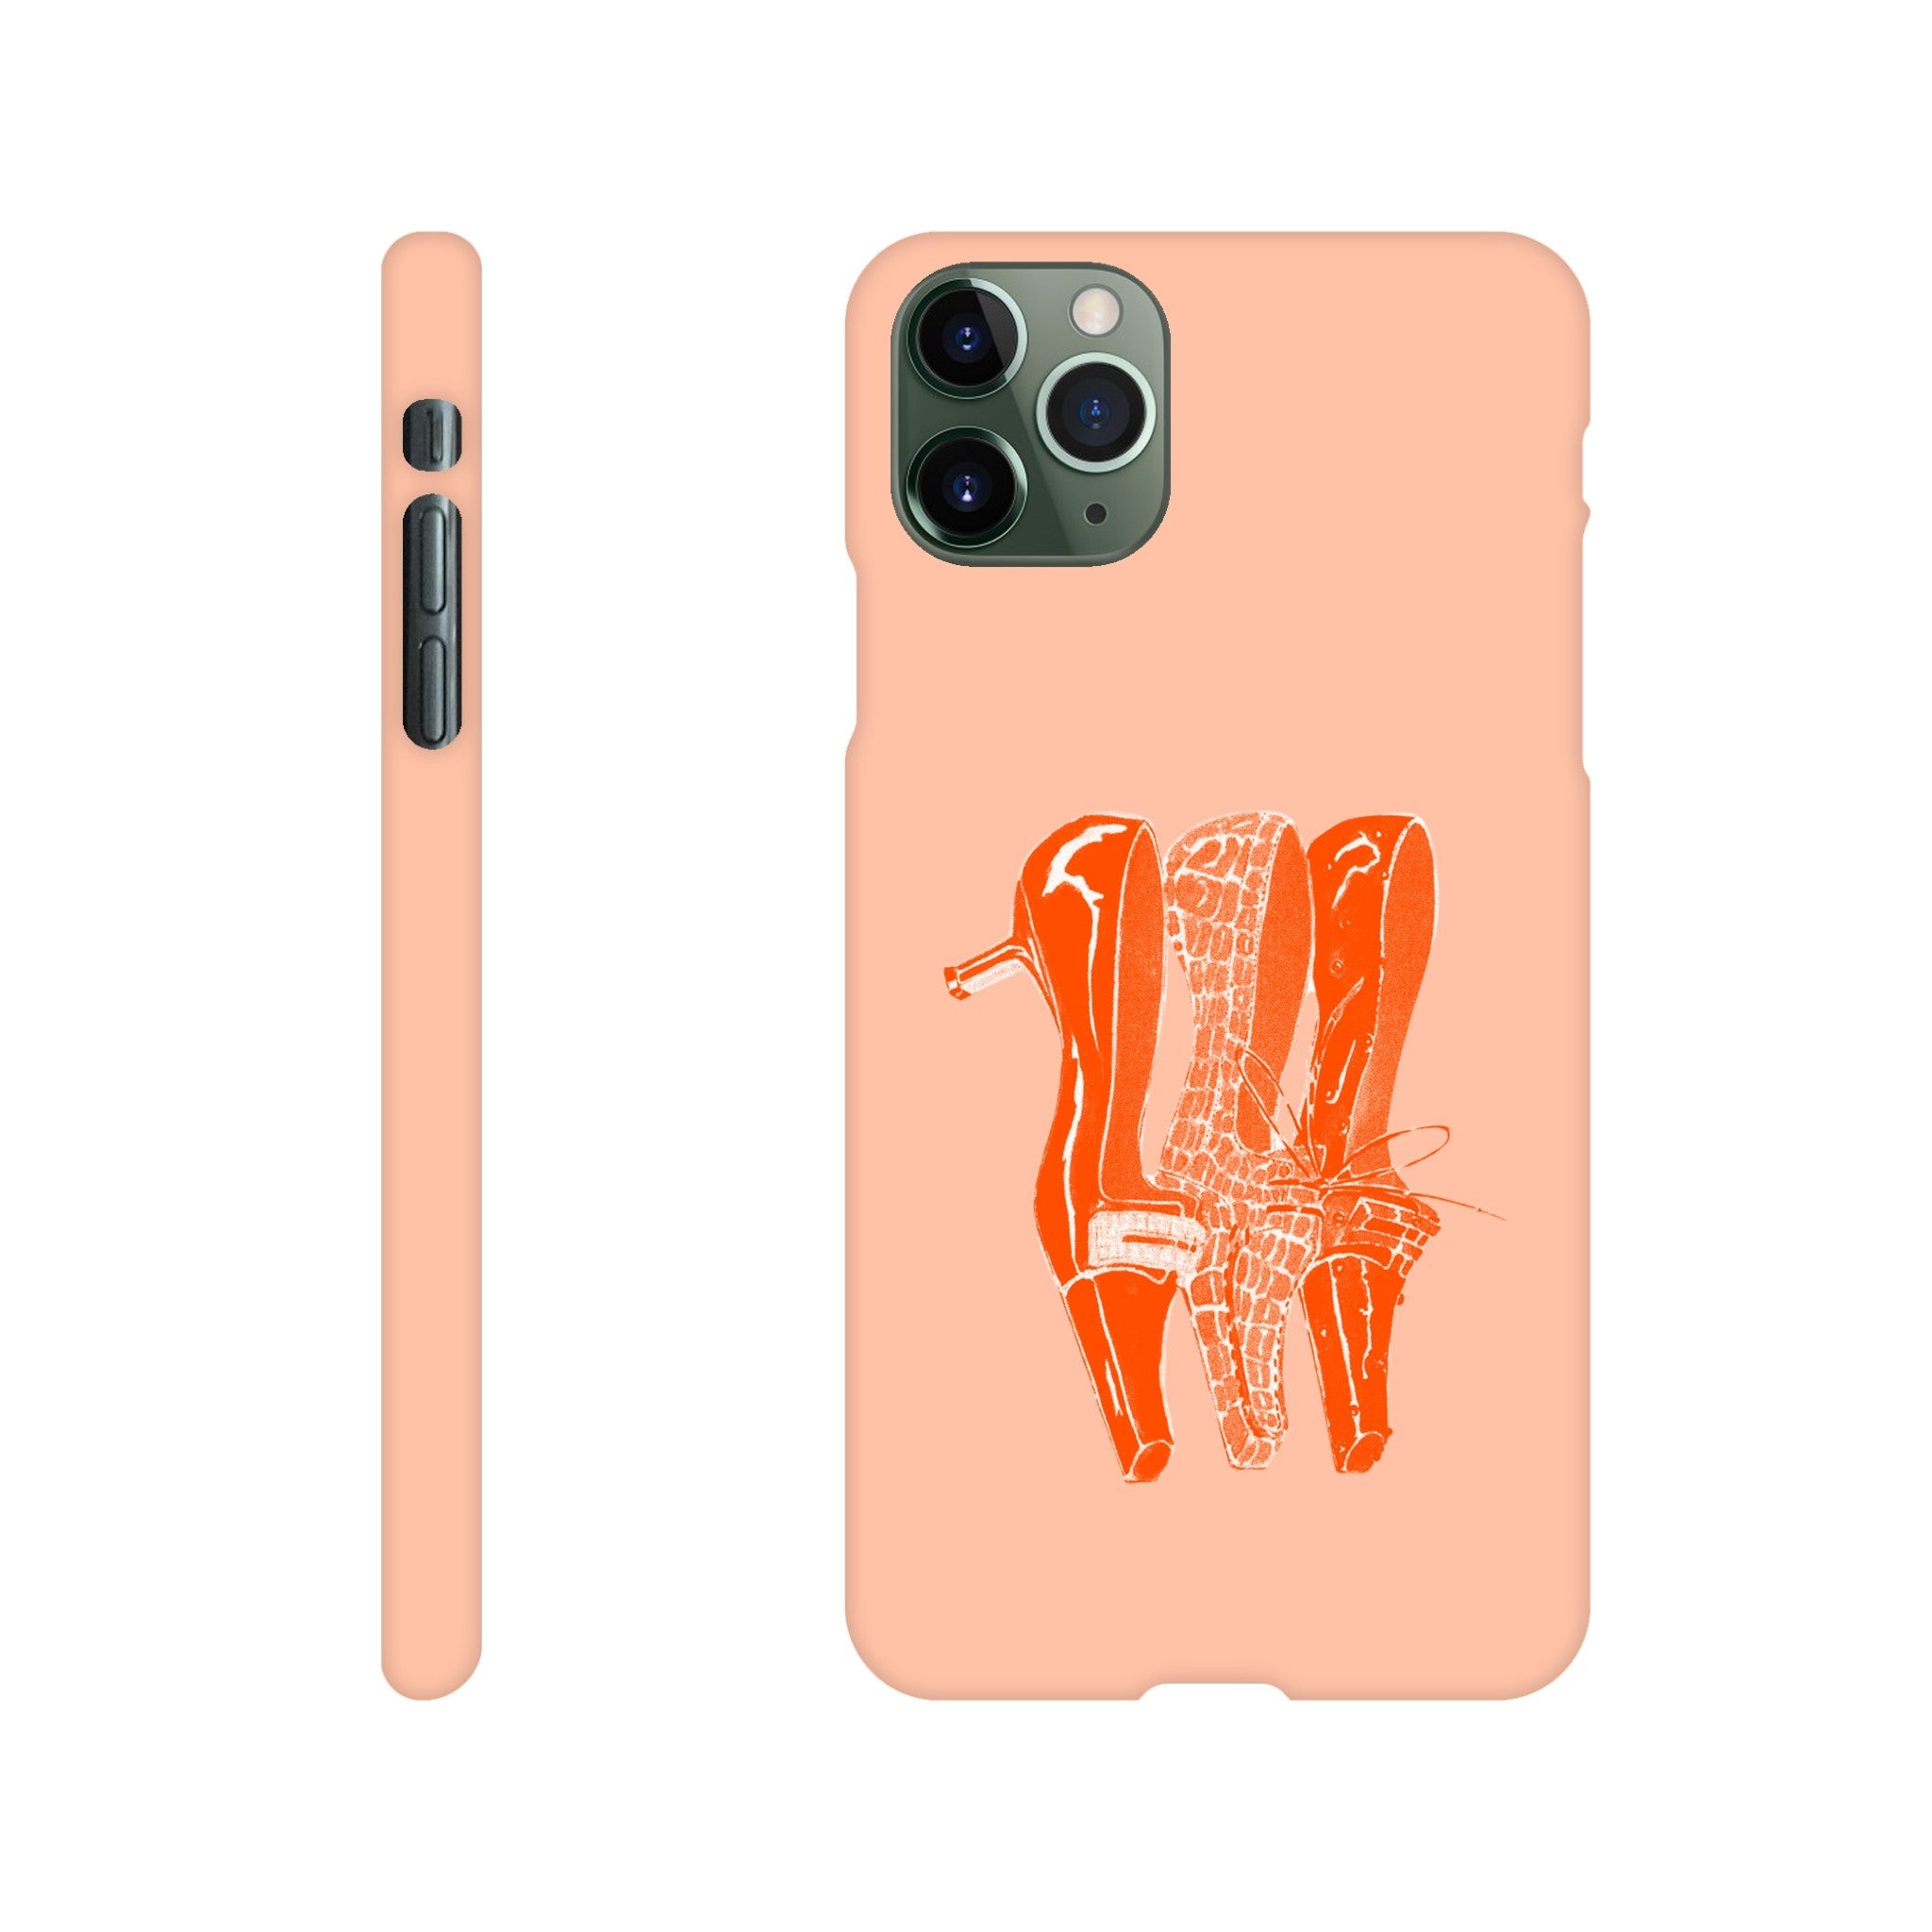 'Manolo' phone case - In Print We Trust